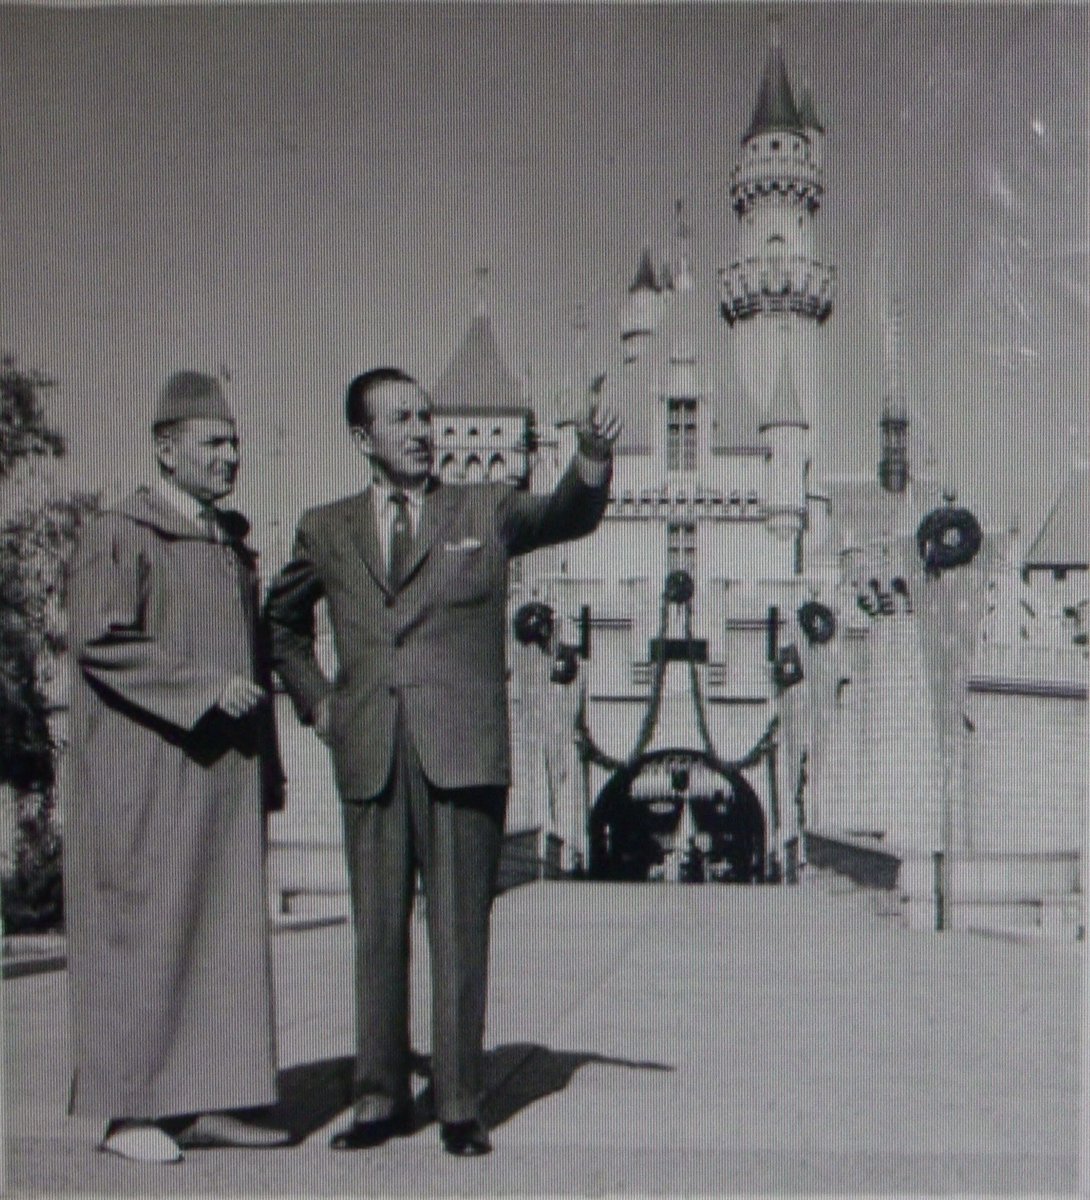 5/ And the story just got interesting. Walt Disney and King Mohammed V were good friends.